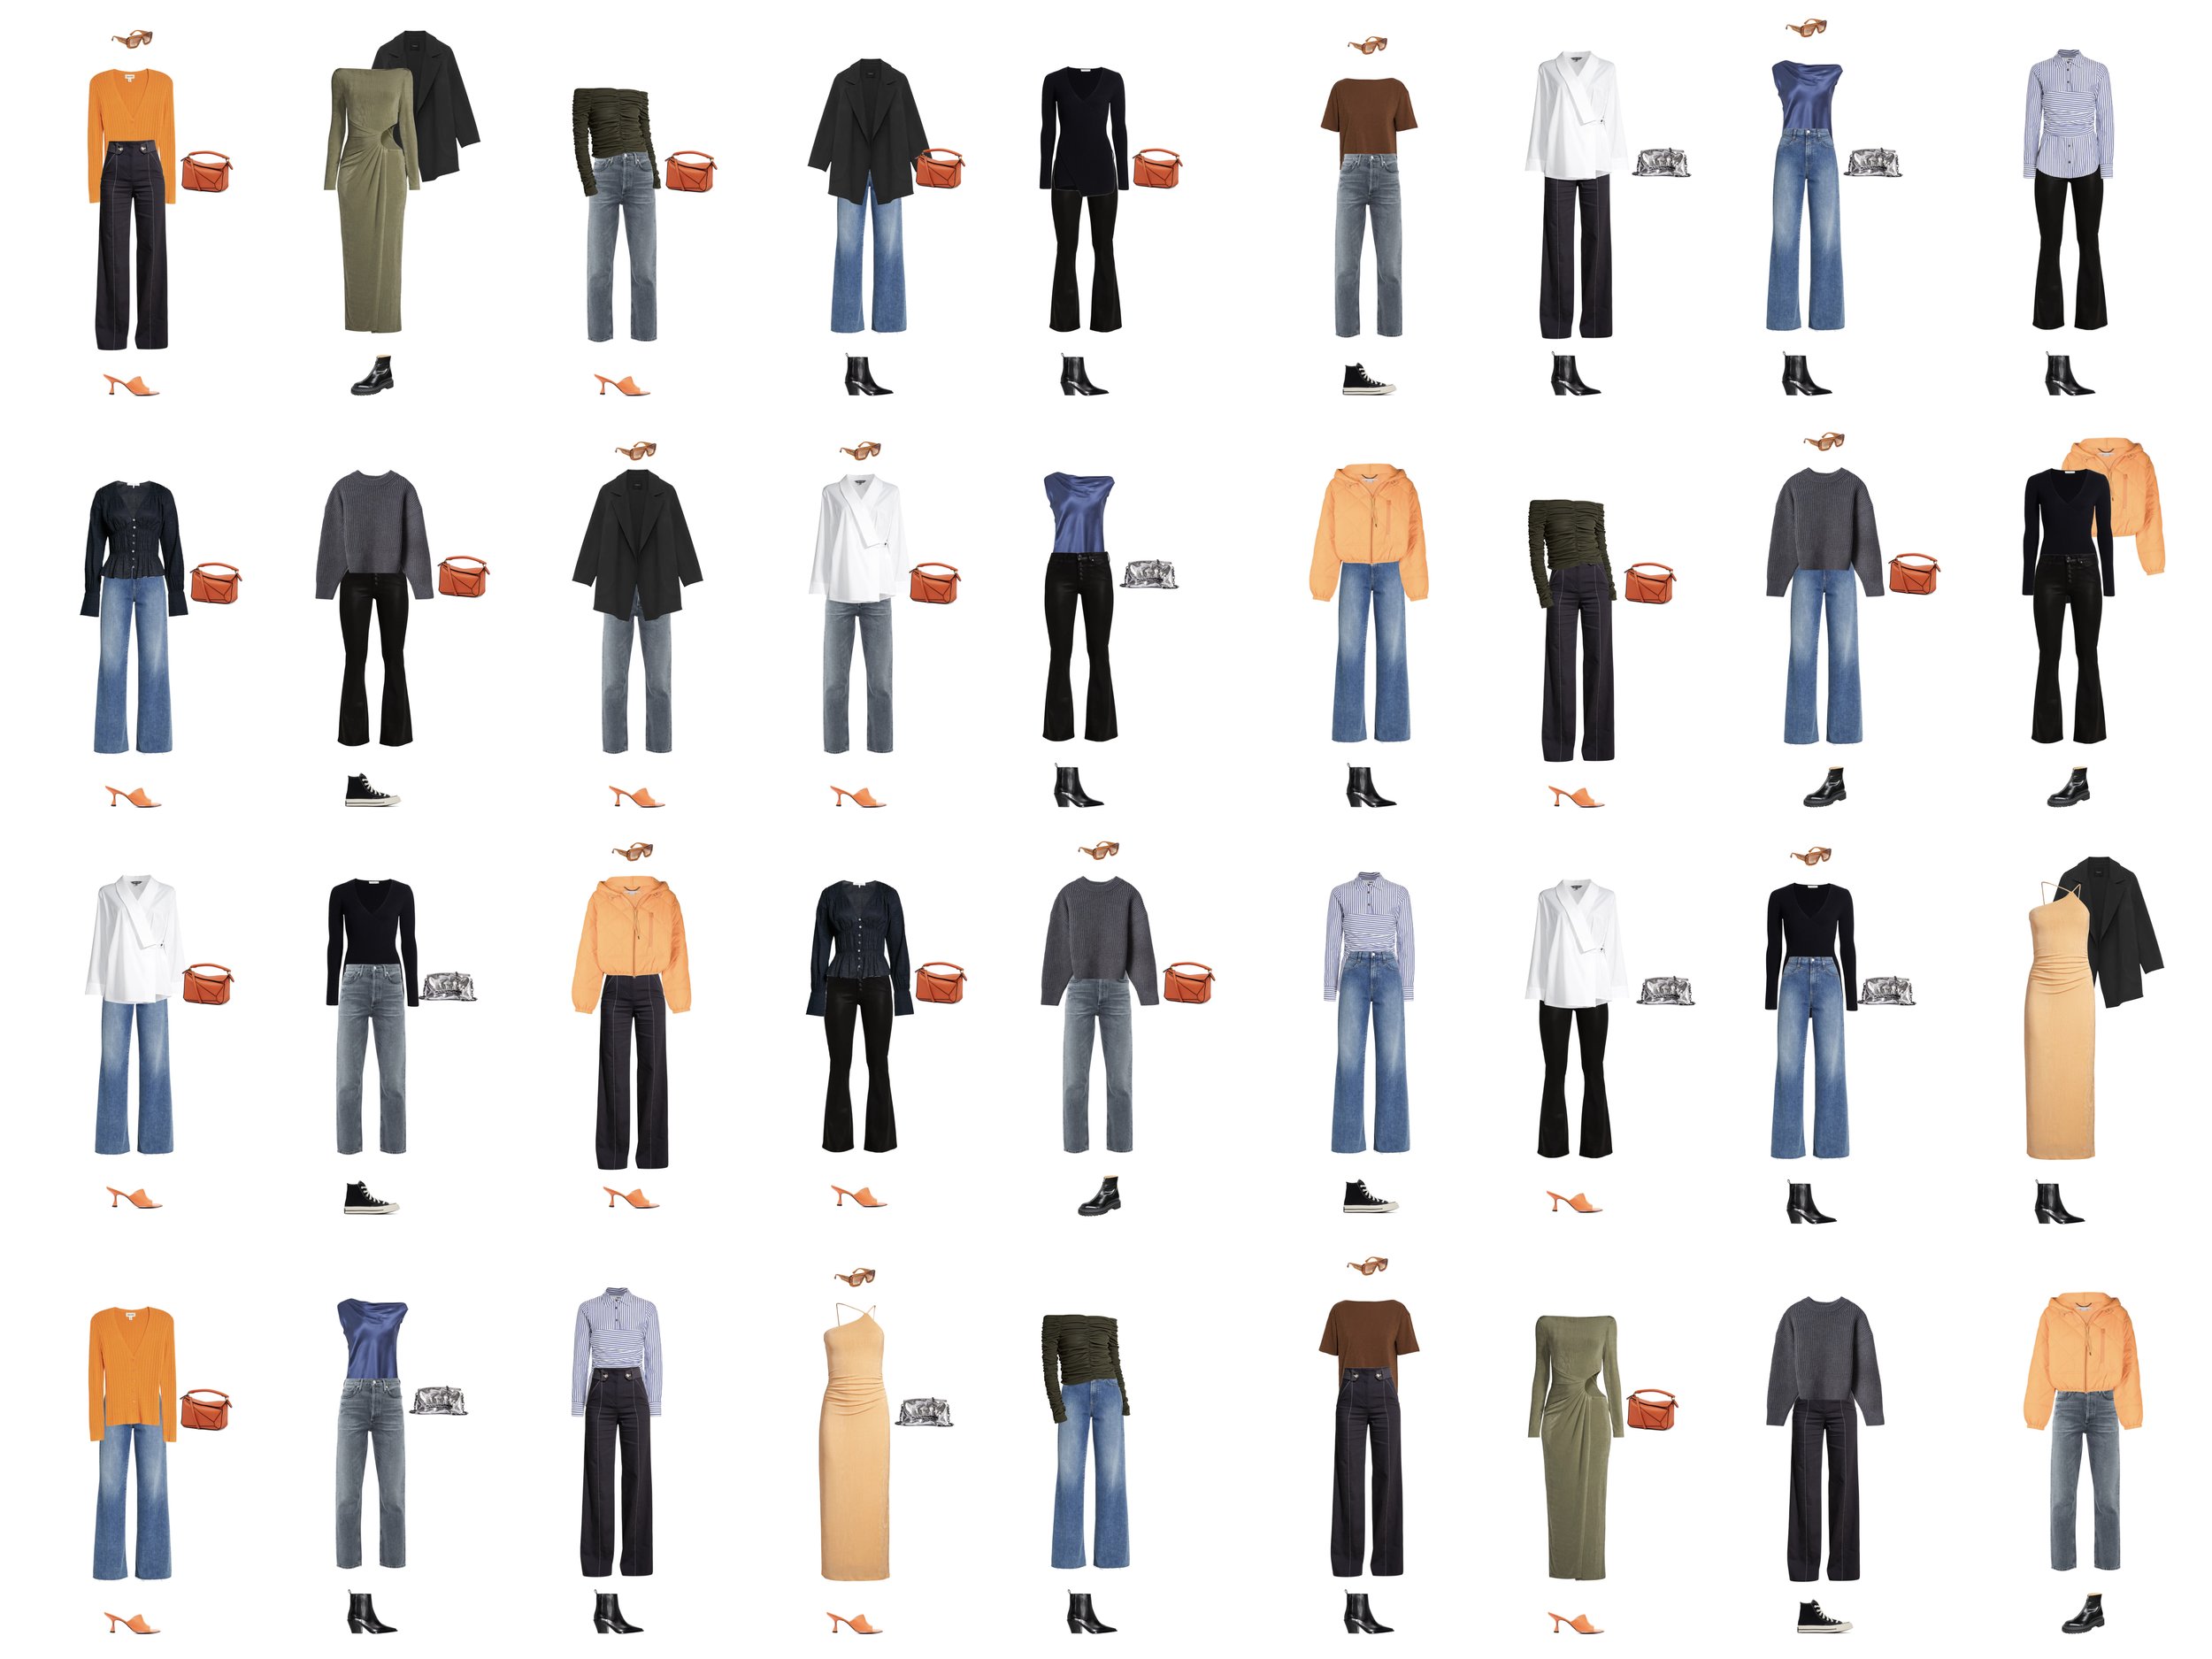 MORE THAN 50 Soft Dramatic Outfit Ideas | Capsule Wardrobes for the ...